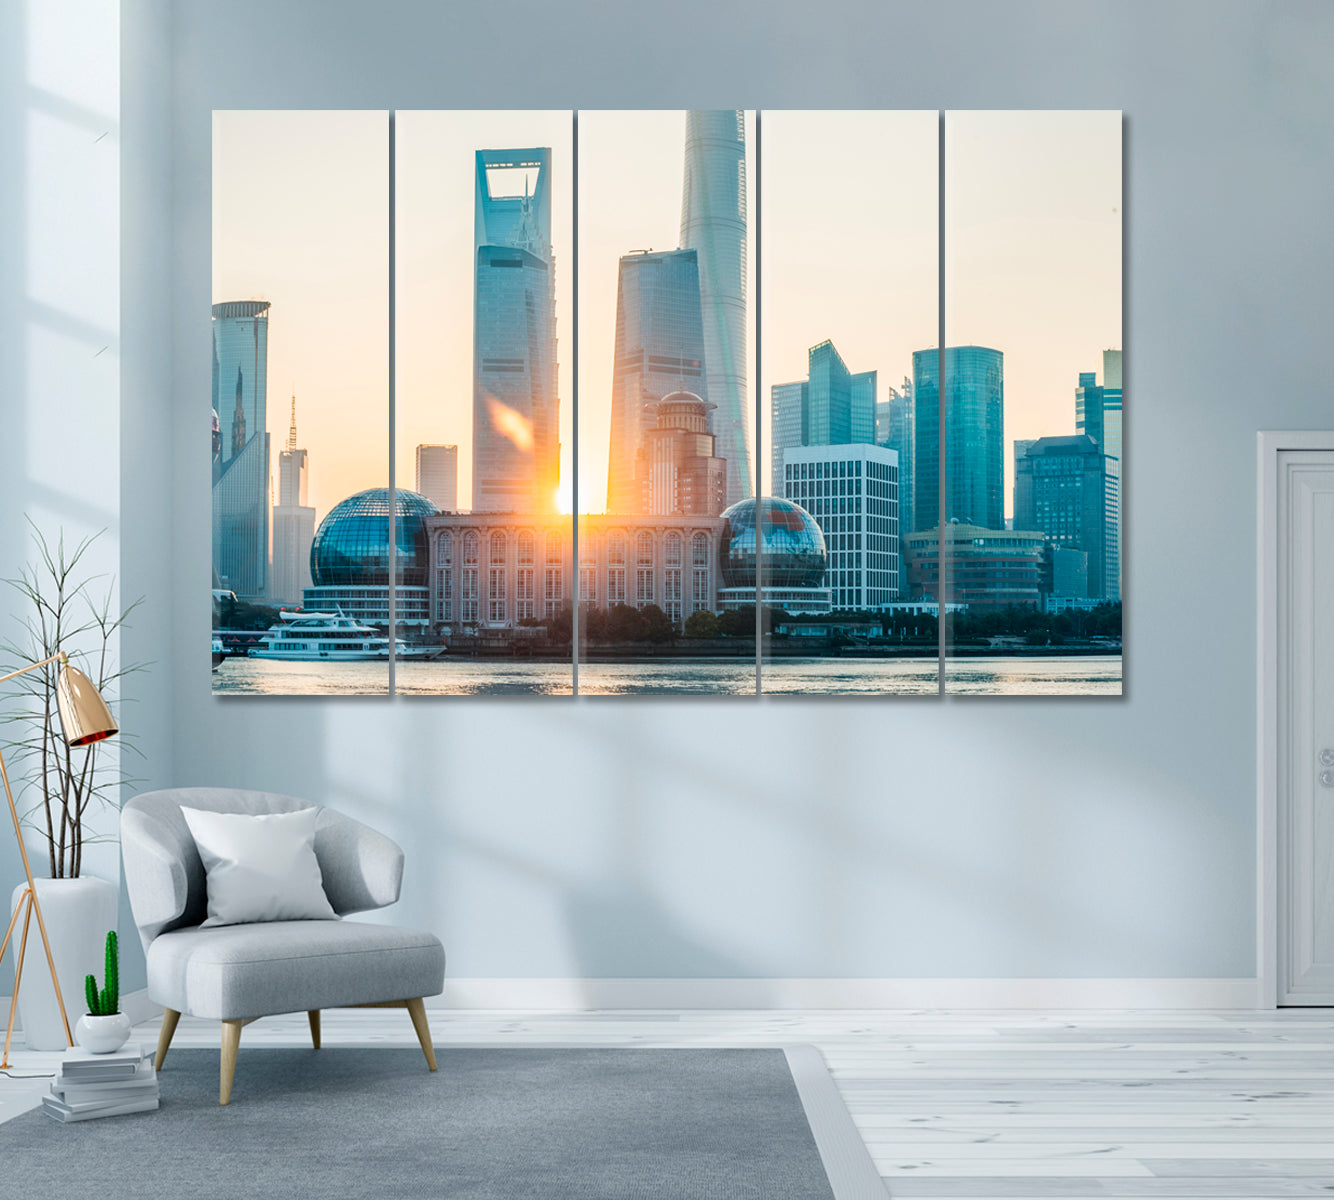 Shanghai Business District Canvas Print ArtLexy 5 Panels 36"x24" inches 